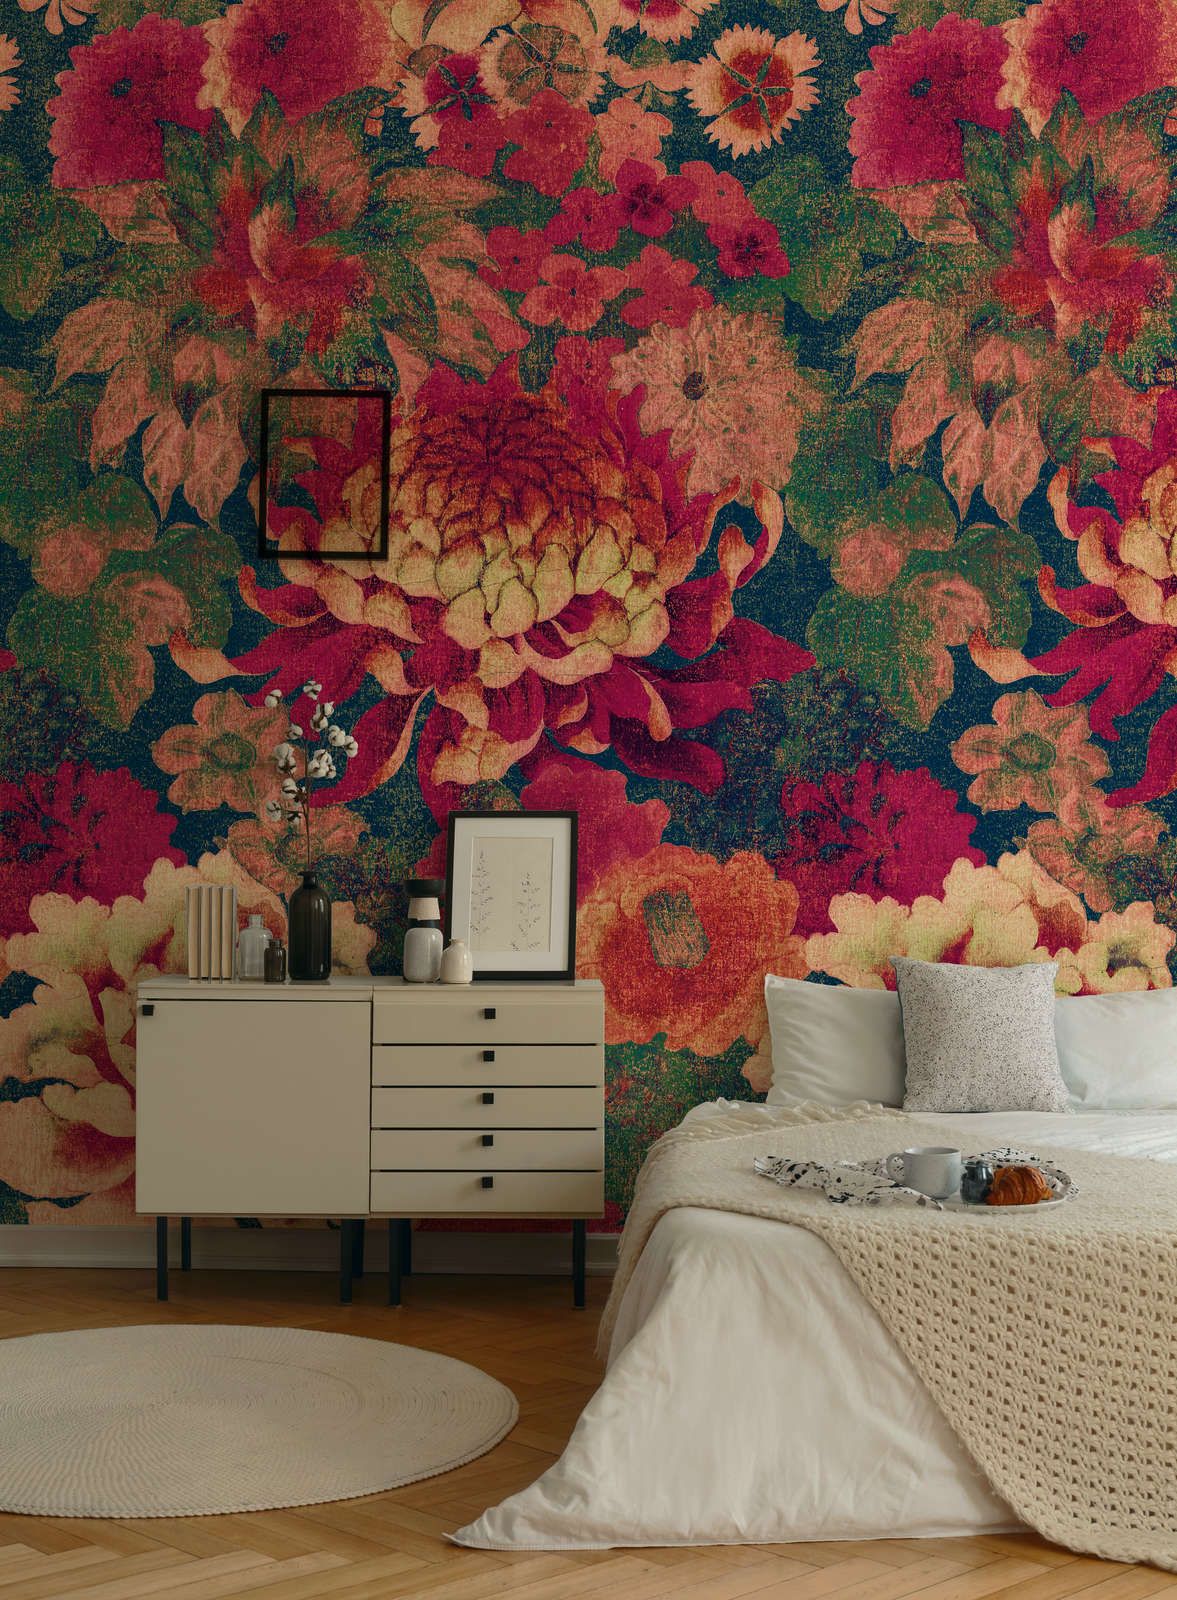             Floral wallpaper with various flowers vintage style - red, green
        